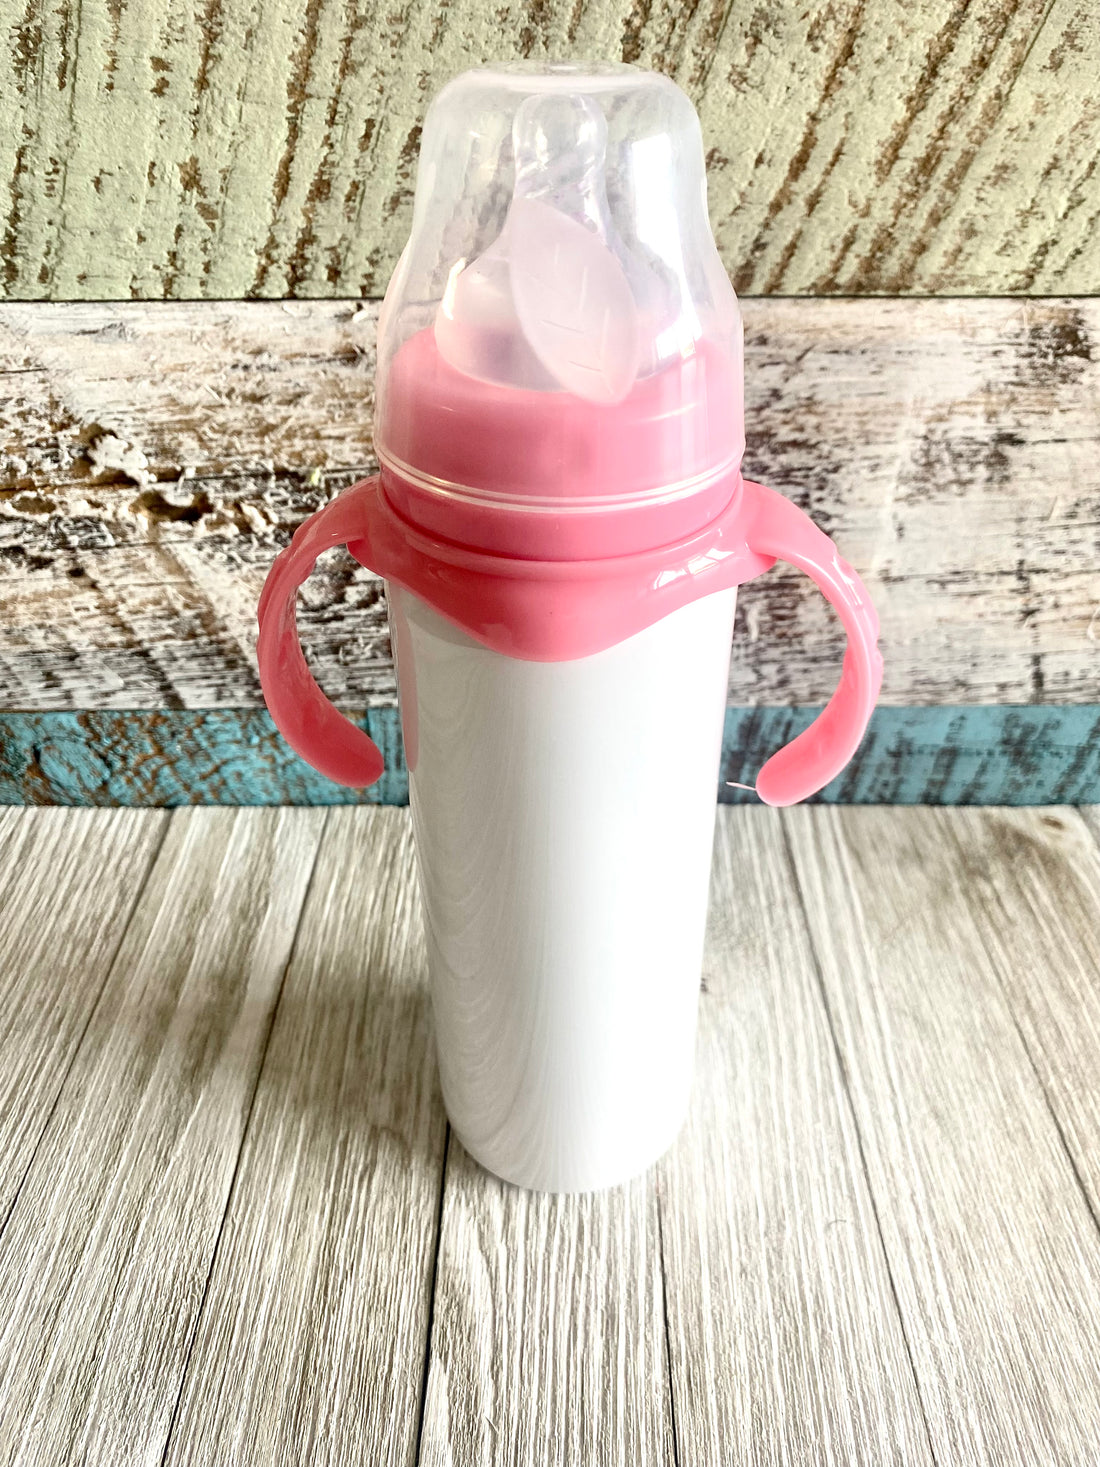 Stainless Steel Baby Bottle, Sublimation Printing, 8oz Baby Bottle, Steel Sublimation Bottle, Customizable Baby Bottle, Personalized Infant Feeding, Stainless Steel Handle Bottle, Durable Sublimation Design, Unique Baby Shower Gift, Eco-friendly Infant Feeding, Premium Sublimated Baby Gear, Safe Stainless Steel Baby Bottle,